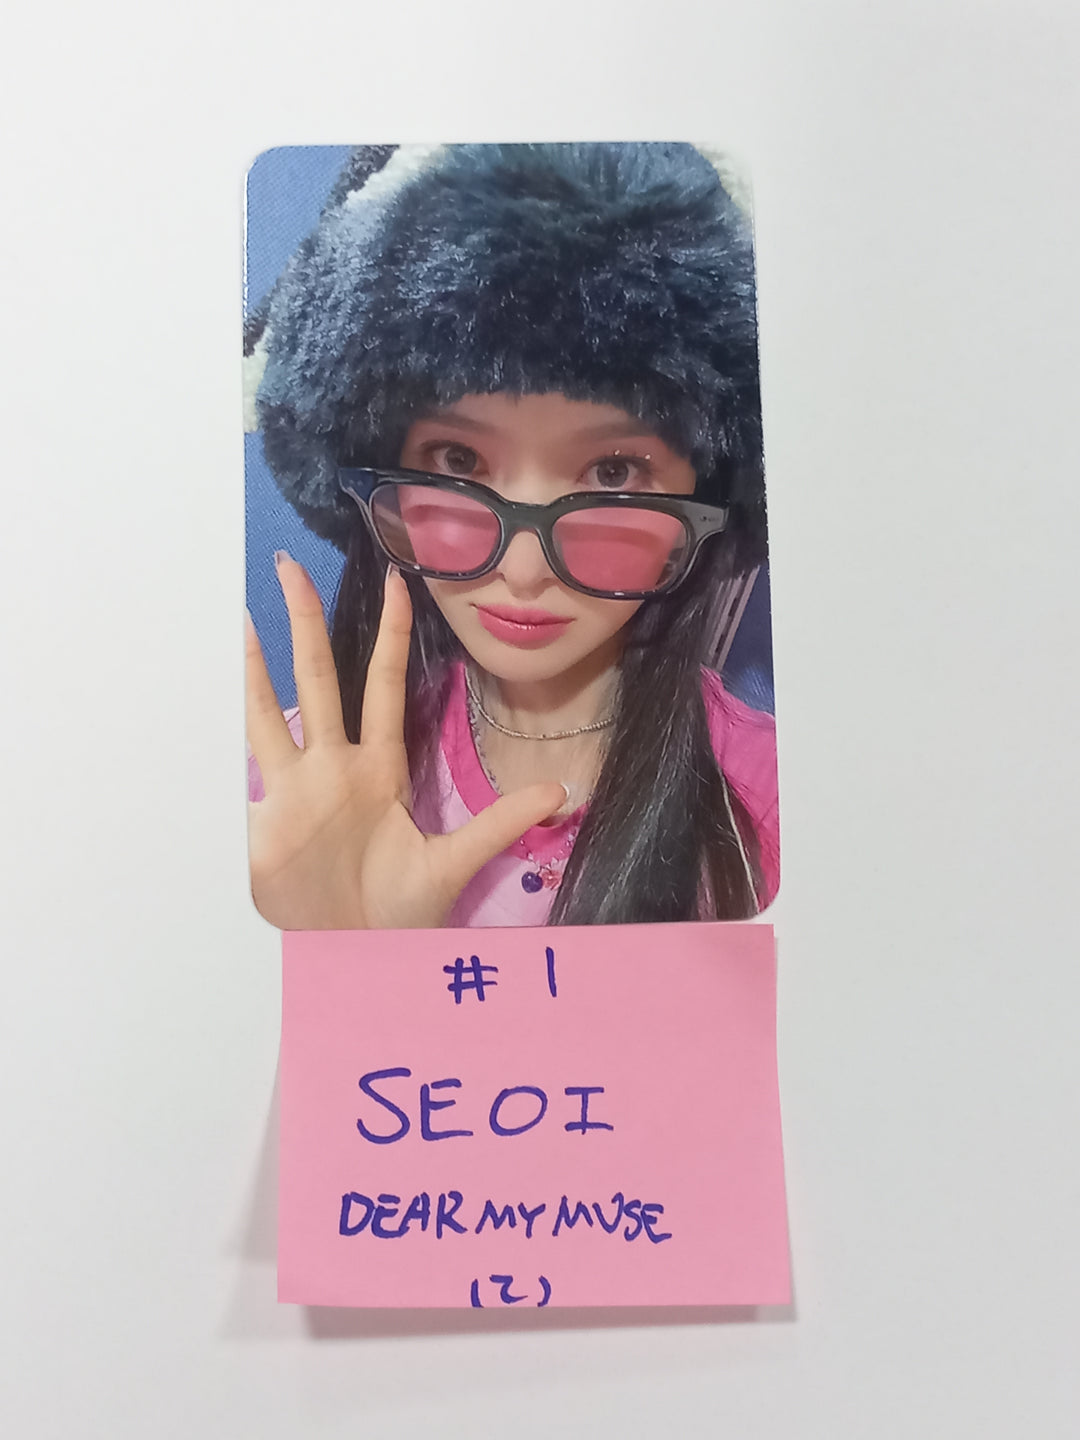 H1-KEY "Seoul Dreaming" - Dear My Muse Fansign Event Photocard [23.10.10]